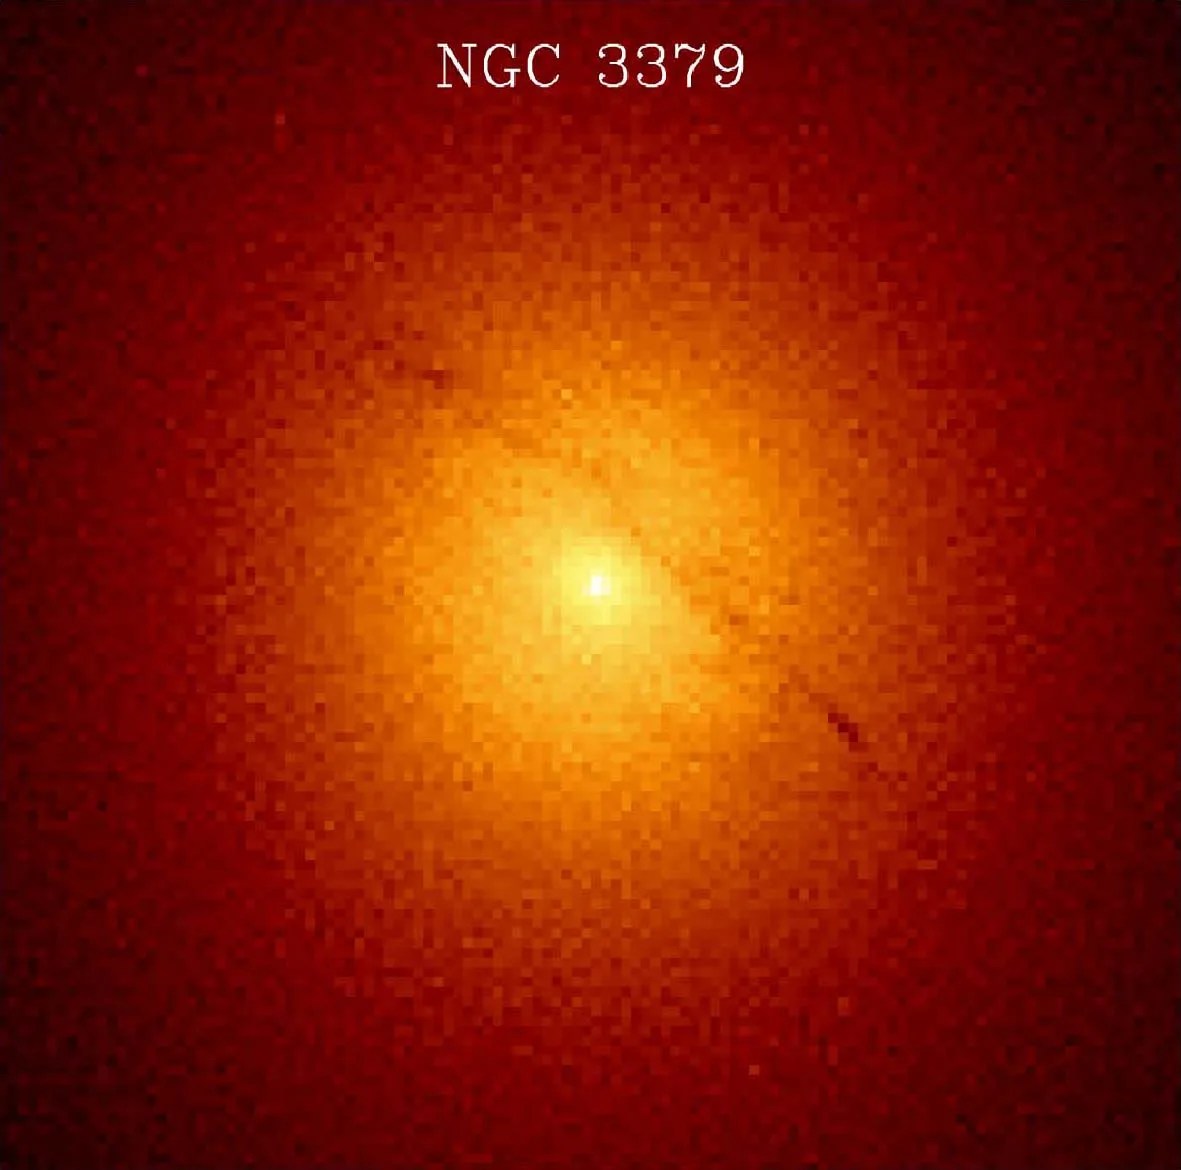 A bright, yellow-orange galaxy core shines, veering into red hues at the corners of the image.